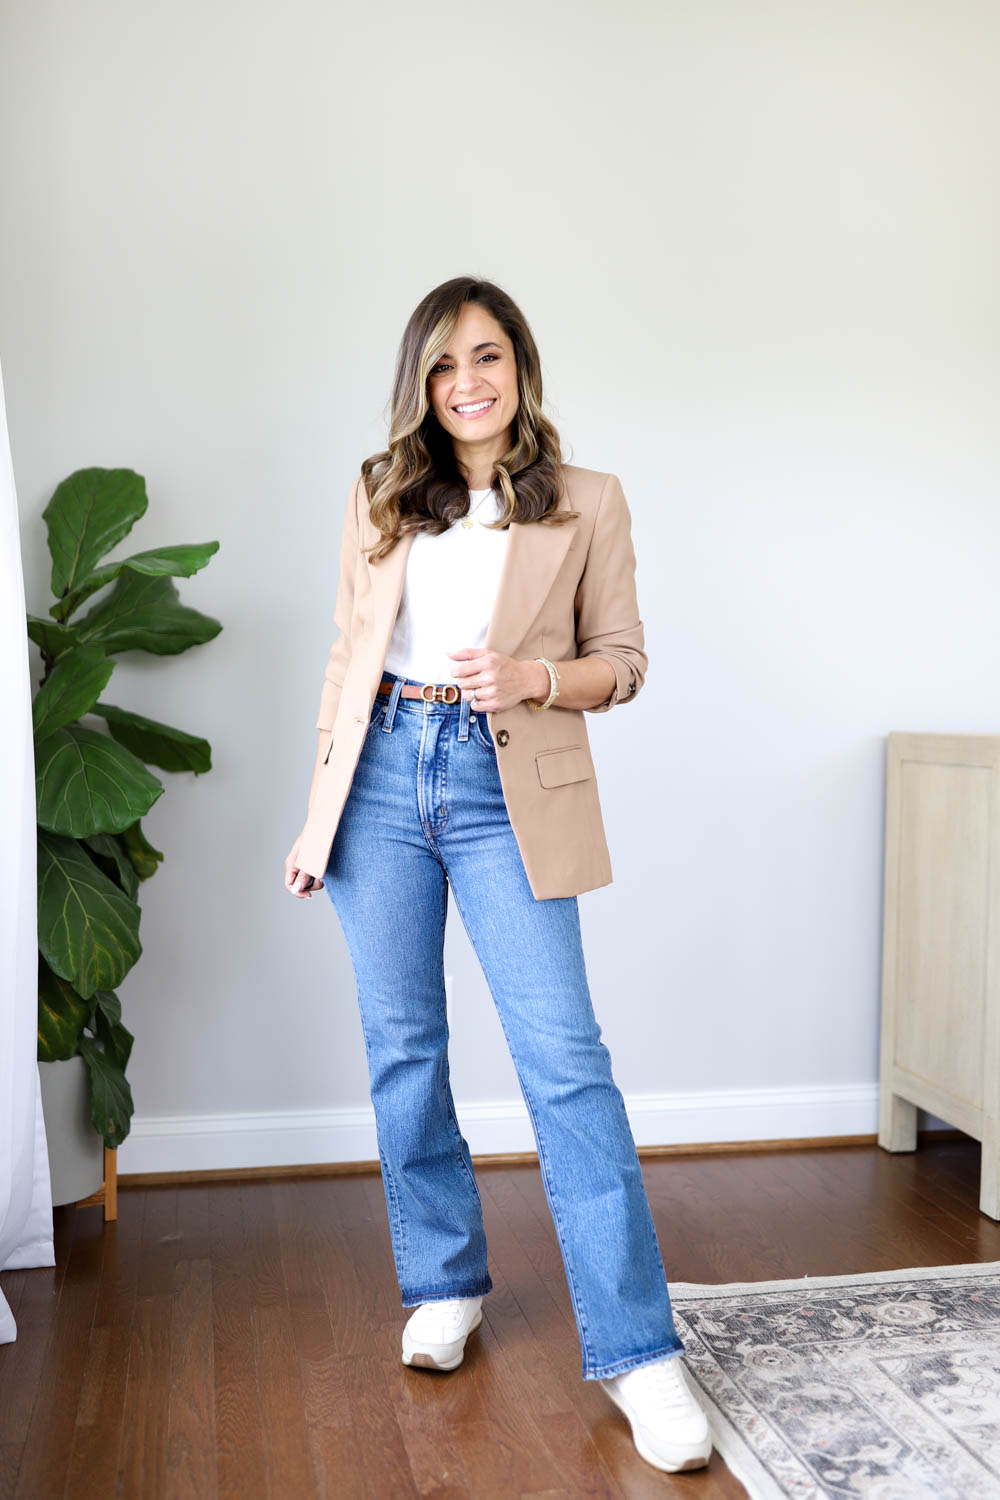 Smart casual outfit ideas for petites via pumps and push-ups blog | outfits for work pumps and push-ups | petite style blog | petite fashion 